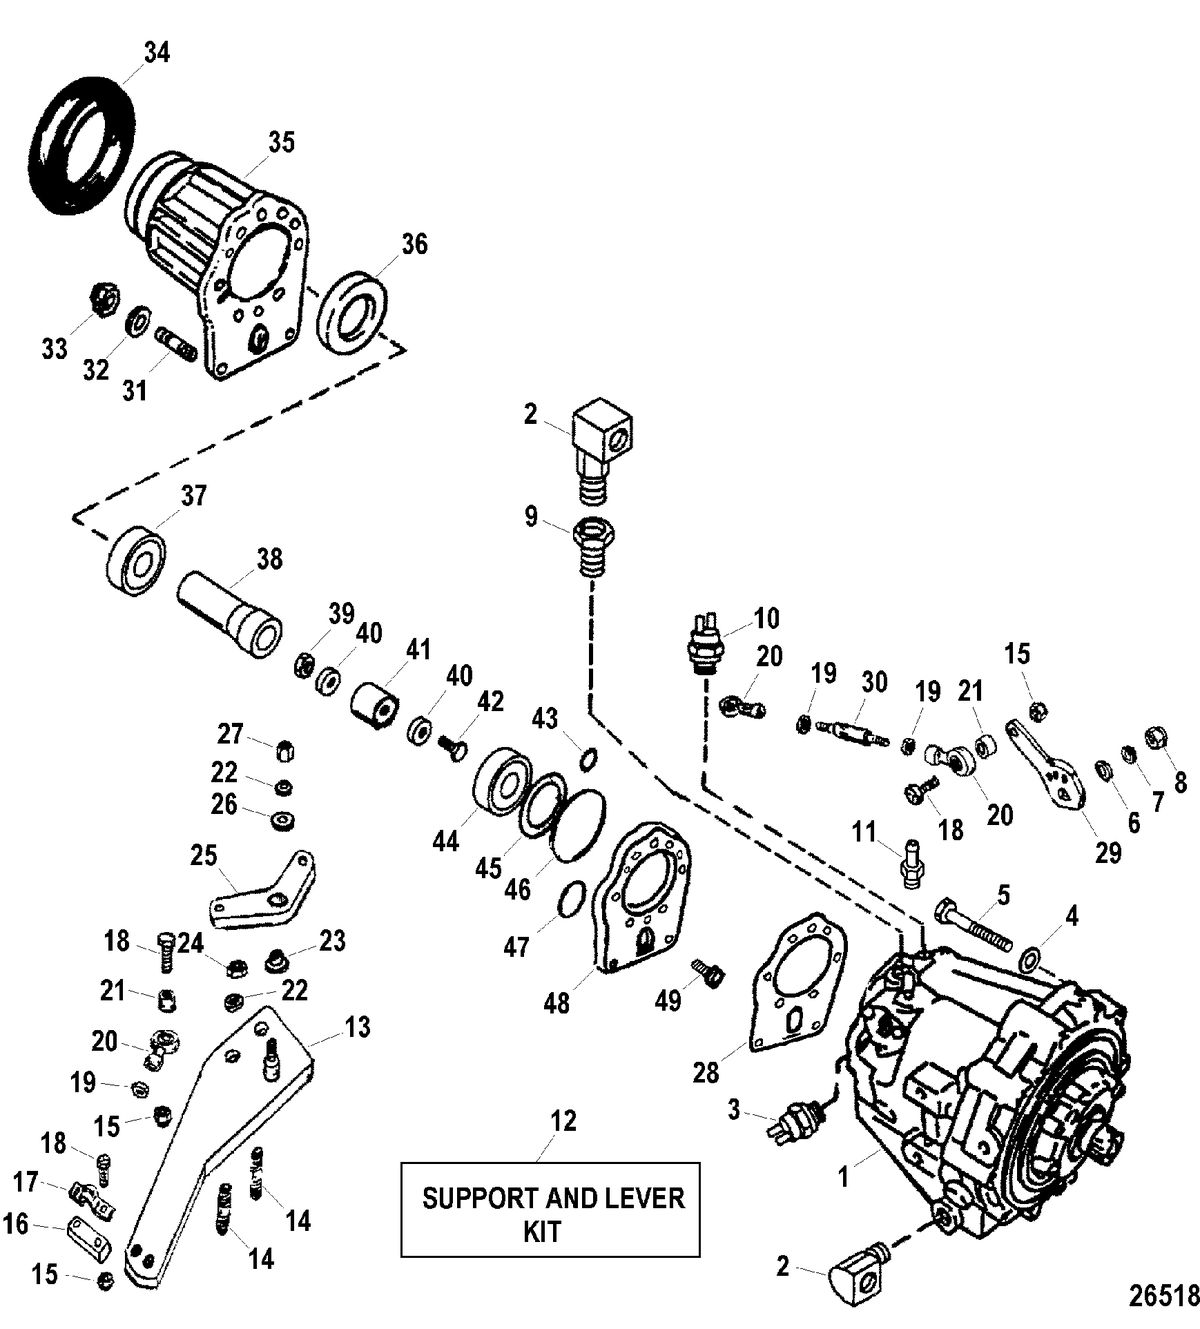 RACE STERNDRIVE 900 SC - DRY SUMP Transmission And Components(Plug In)